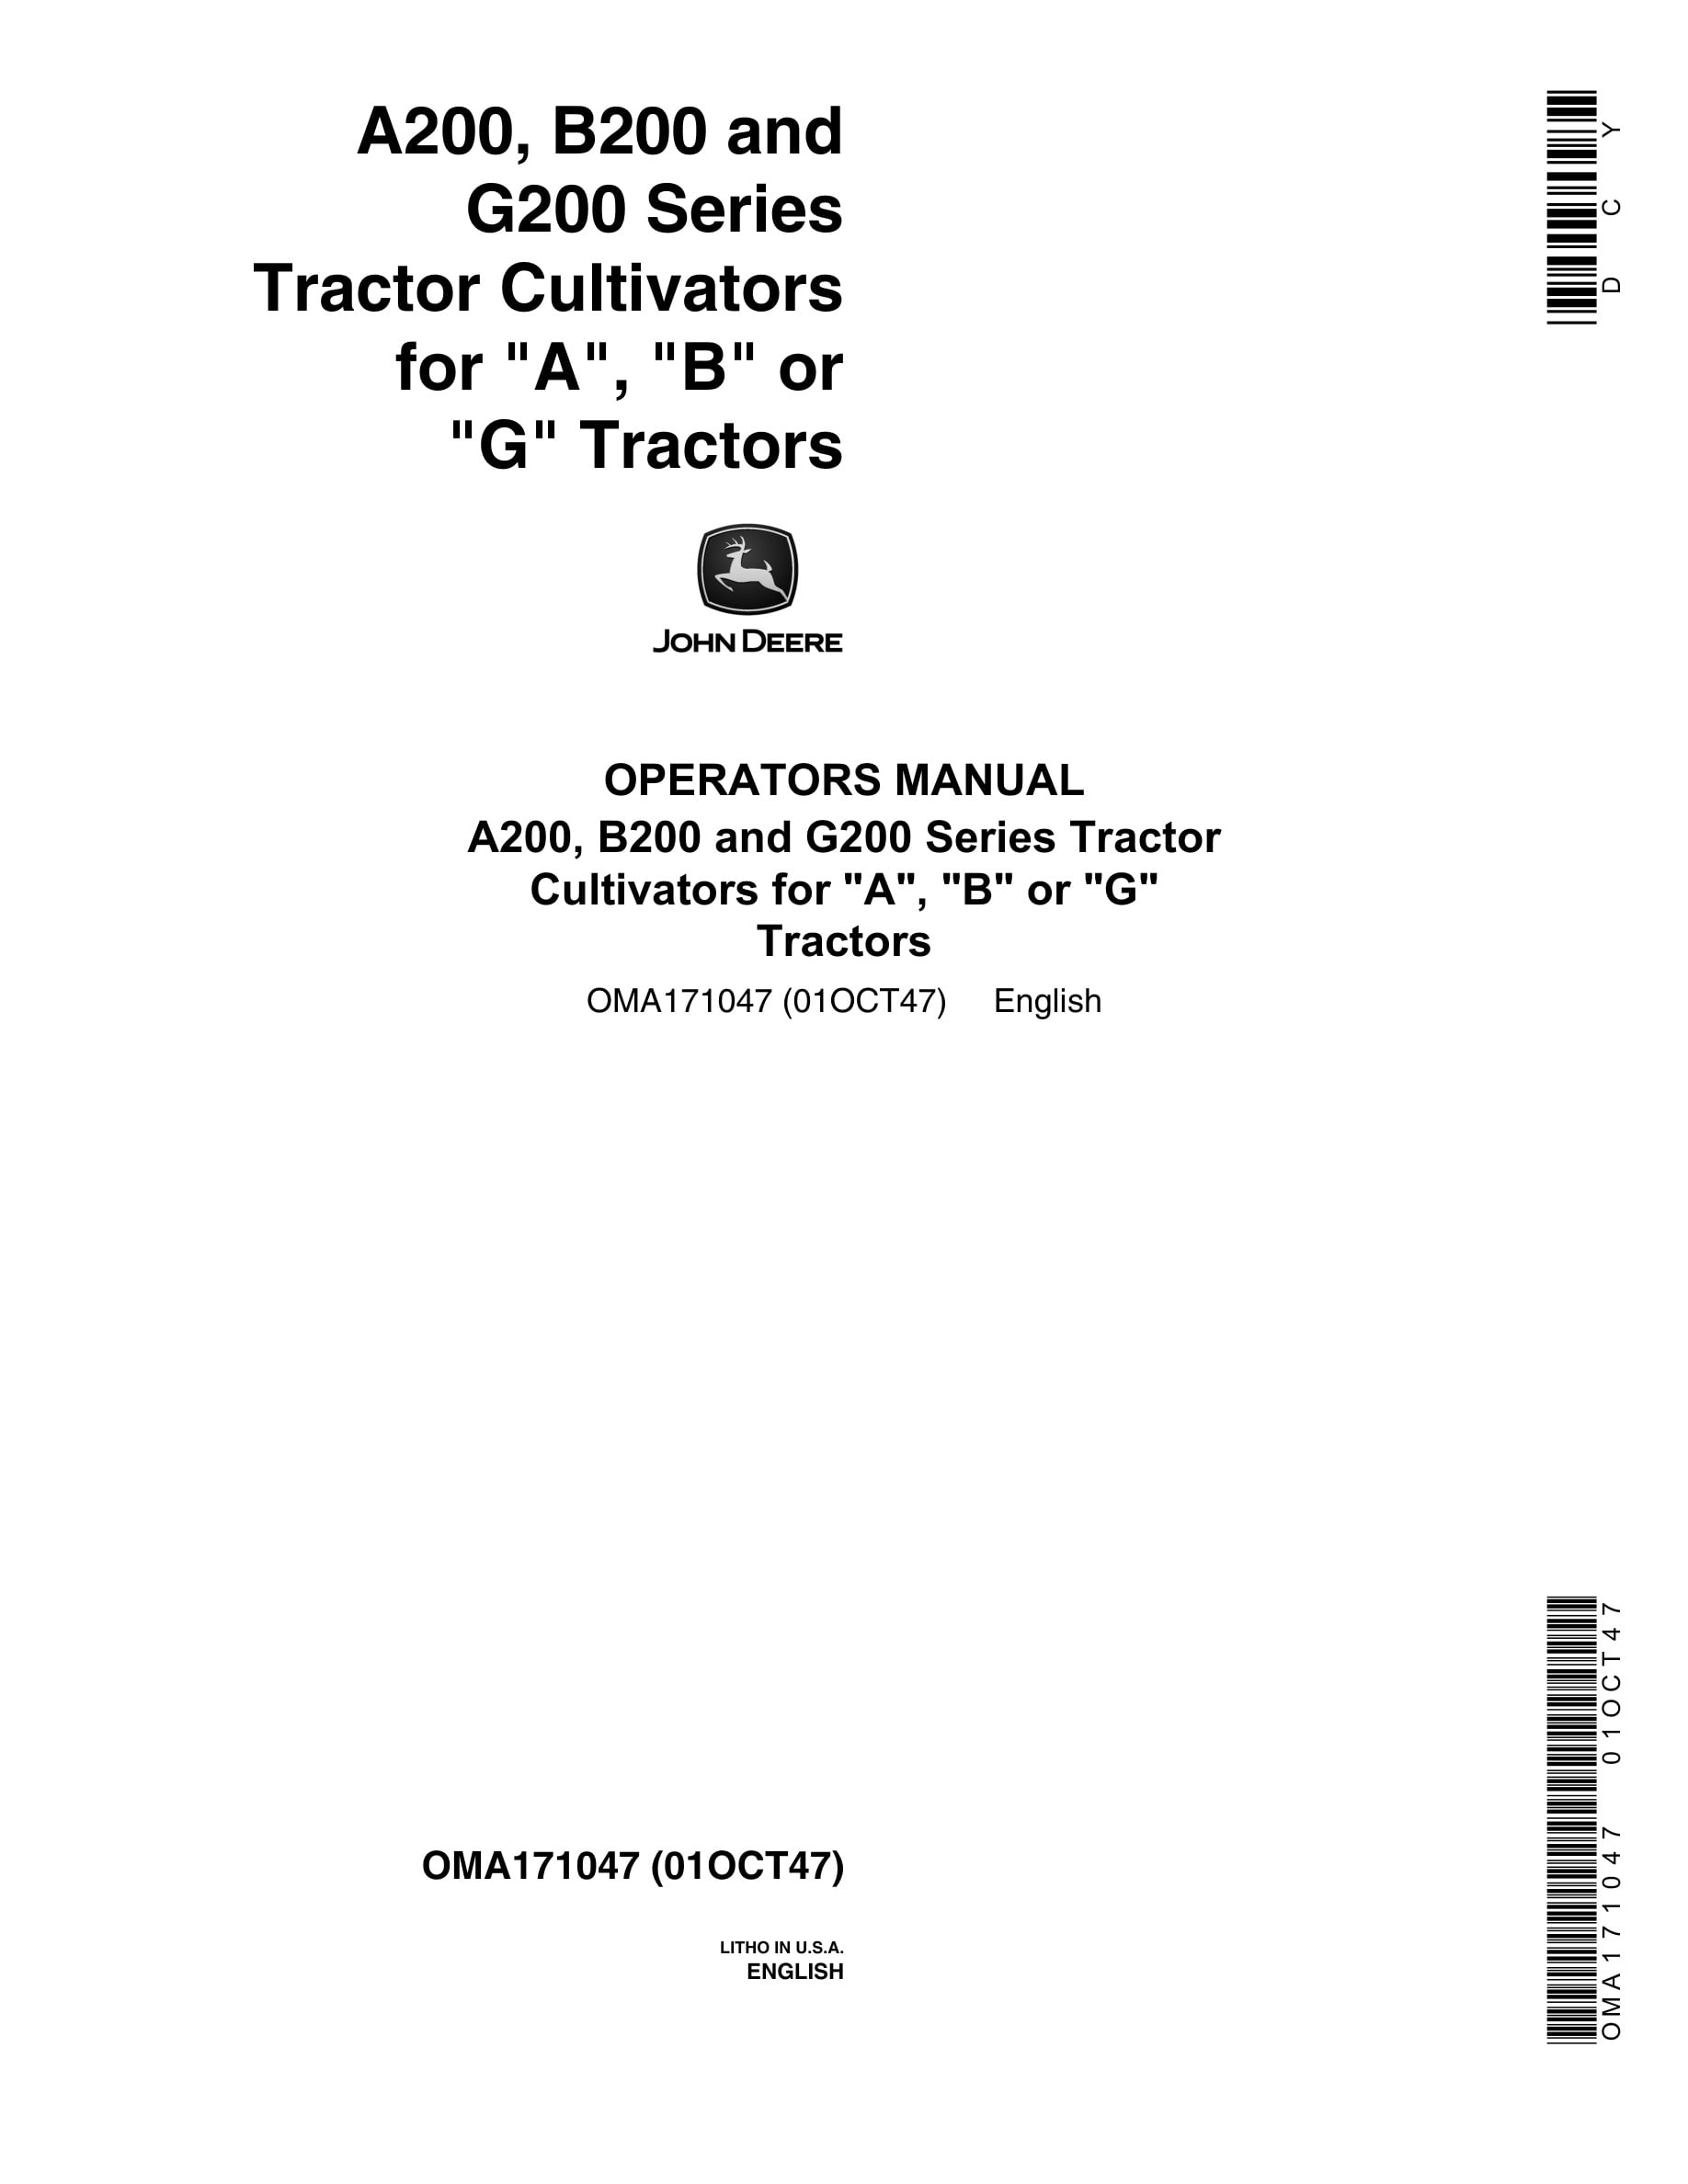 John Deere A200, B200 and G200 Series Tractor CULTIVATOR for A, B or G Tractors Operator Manual OMA171047-1